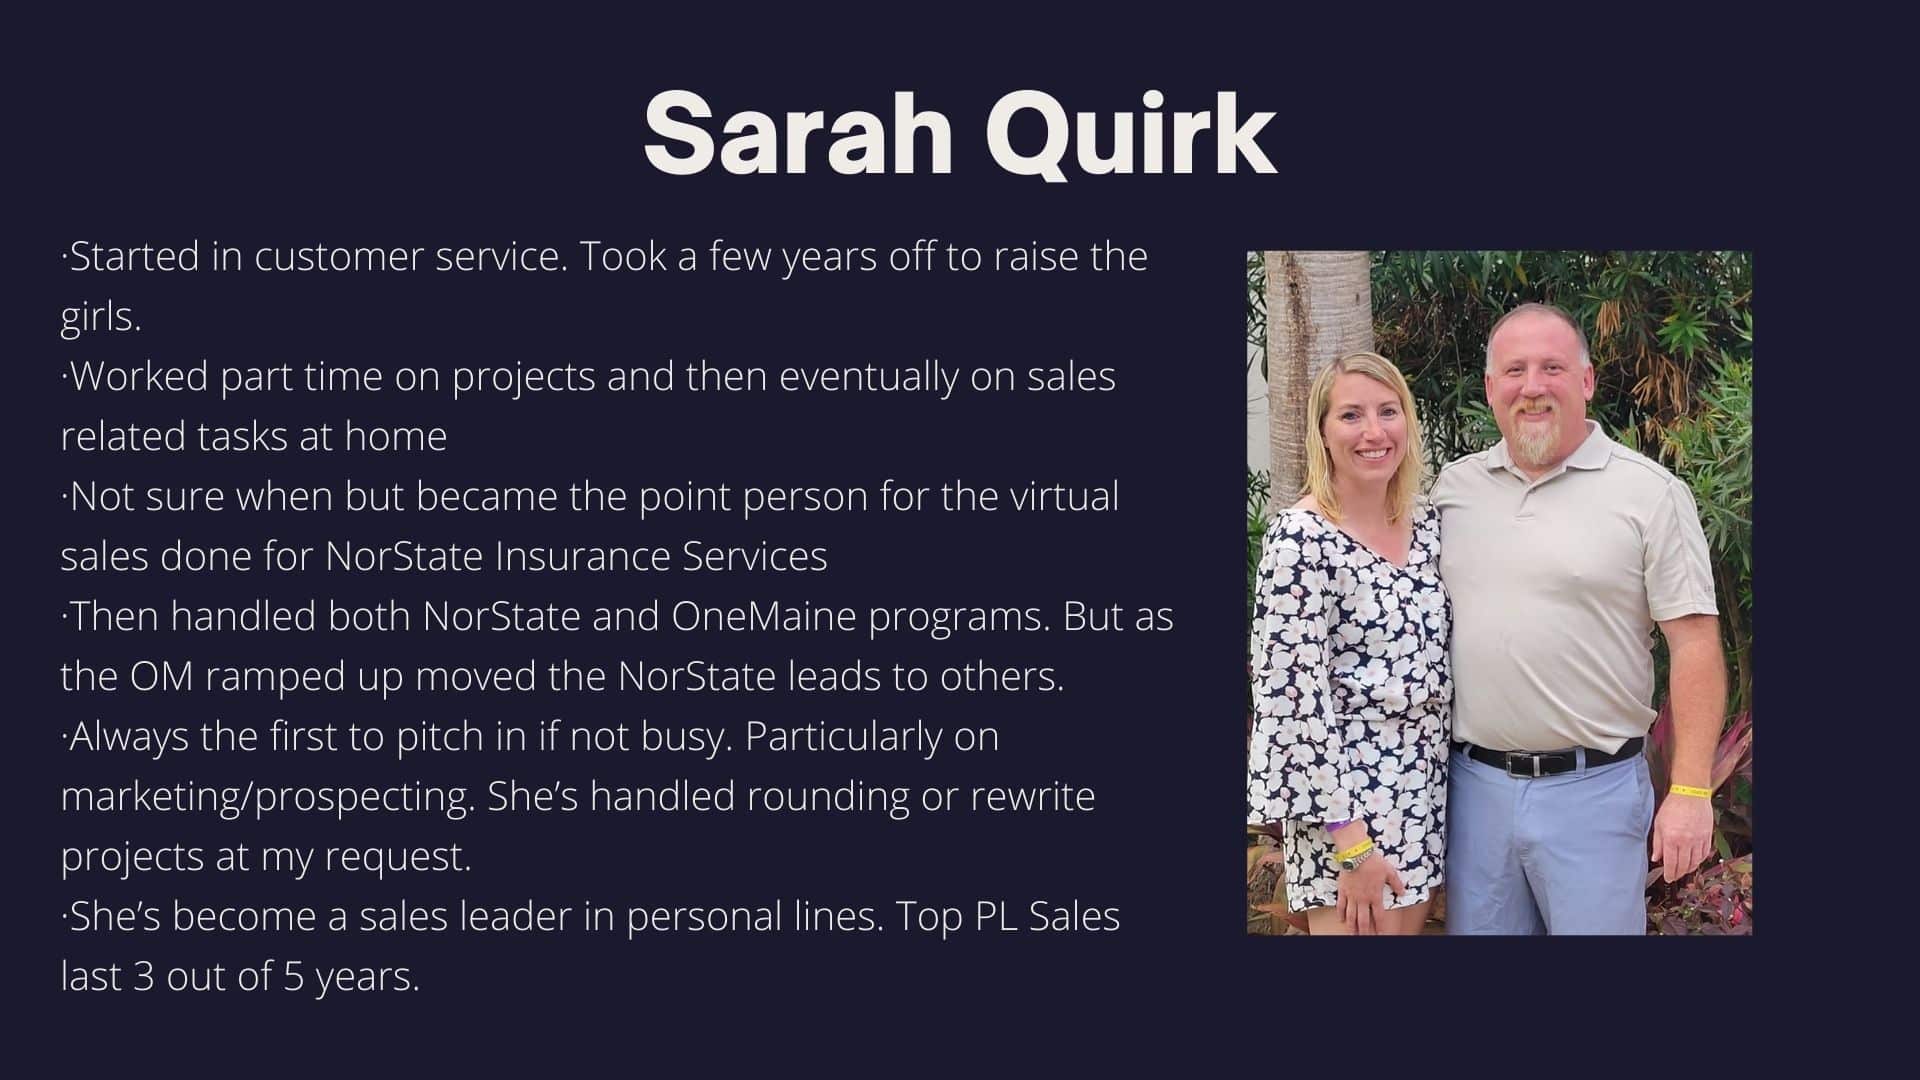 Sarah Quirk 15 years